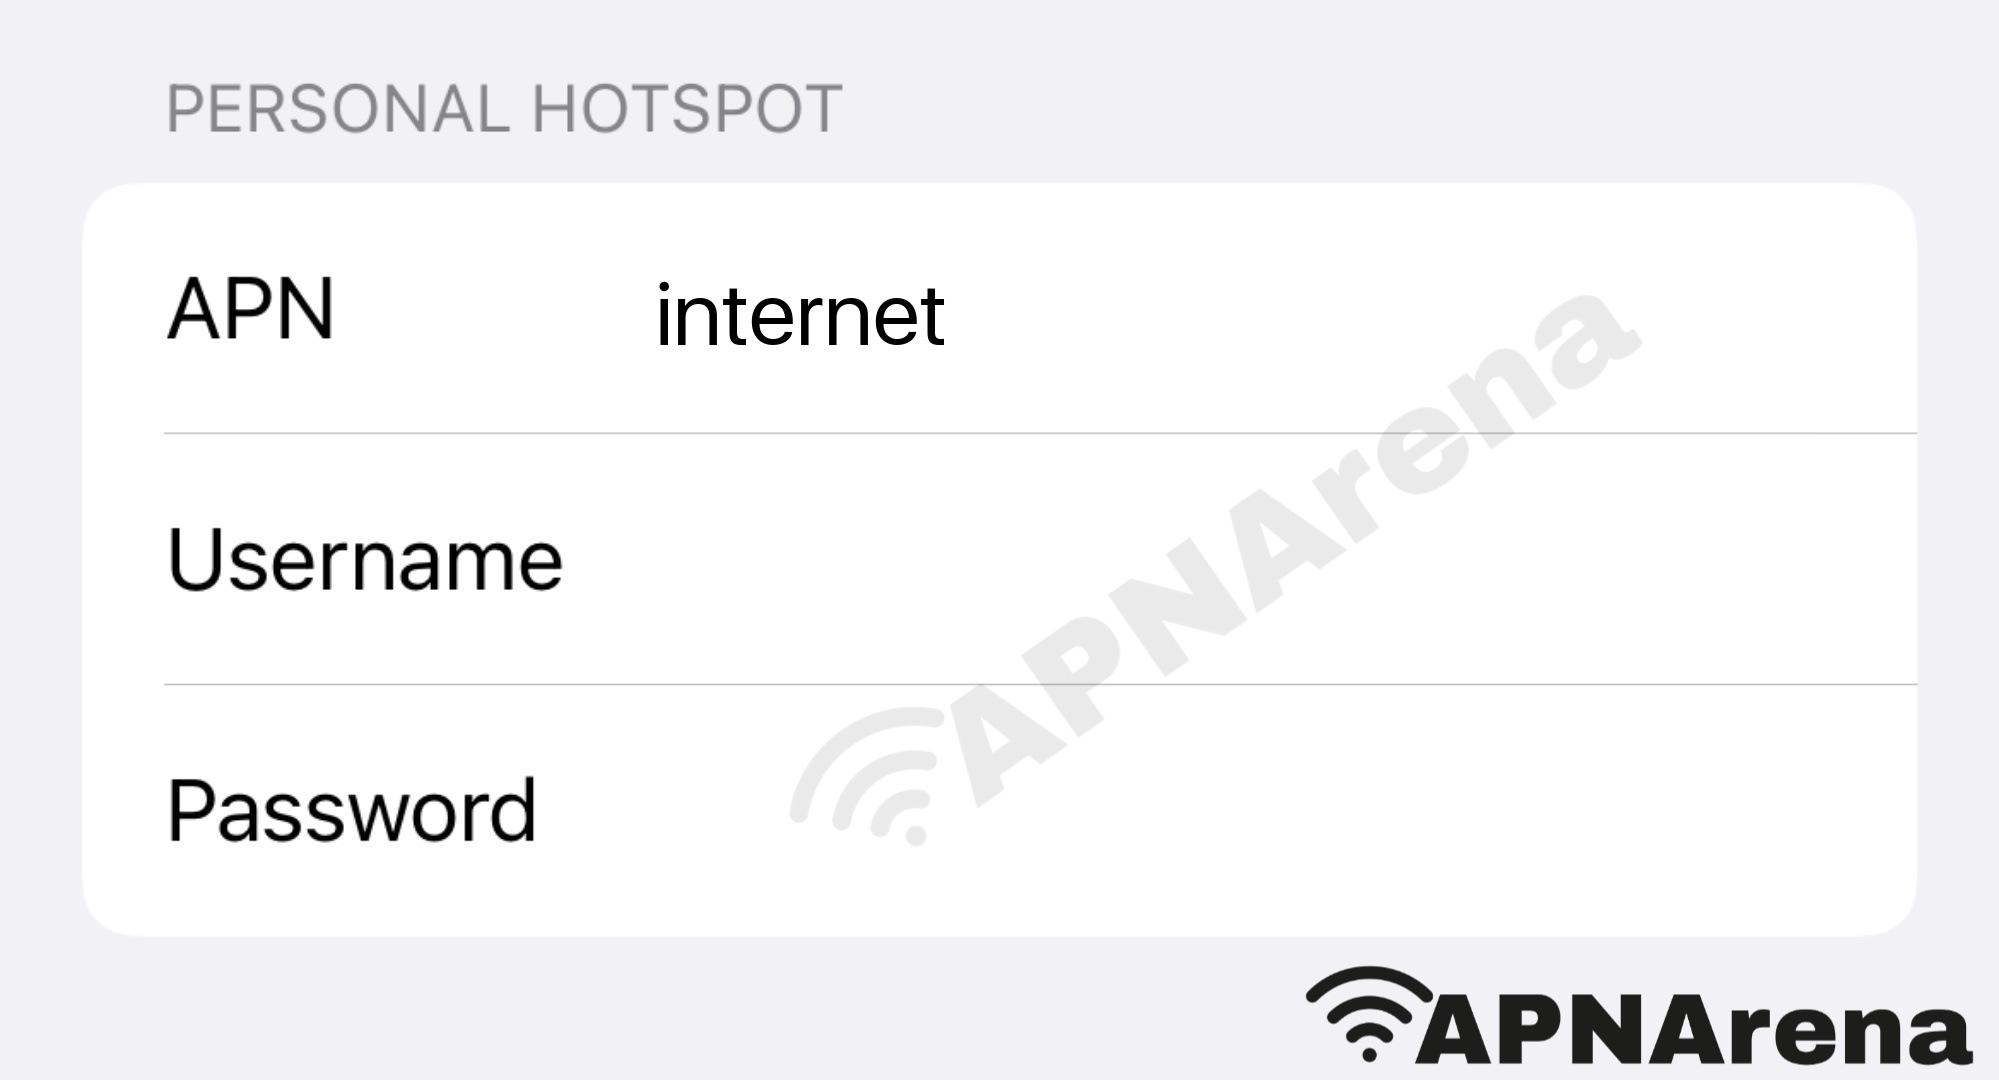 7-Eleven Speak Out Wireless Personal Hotspot Settings for iPhone